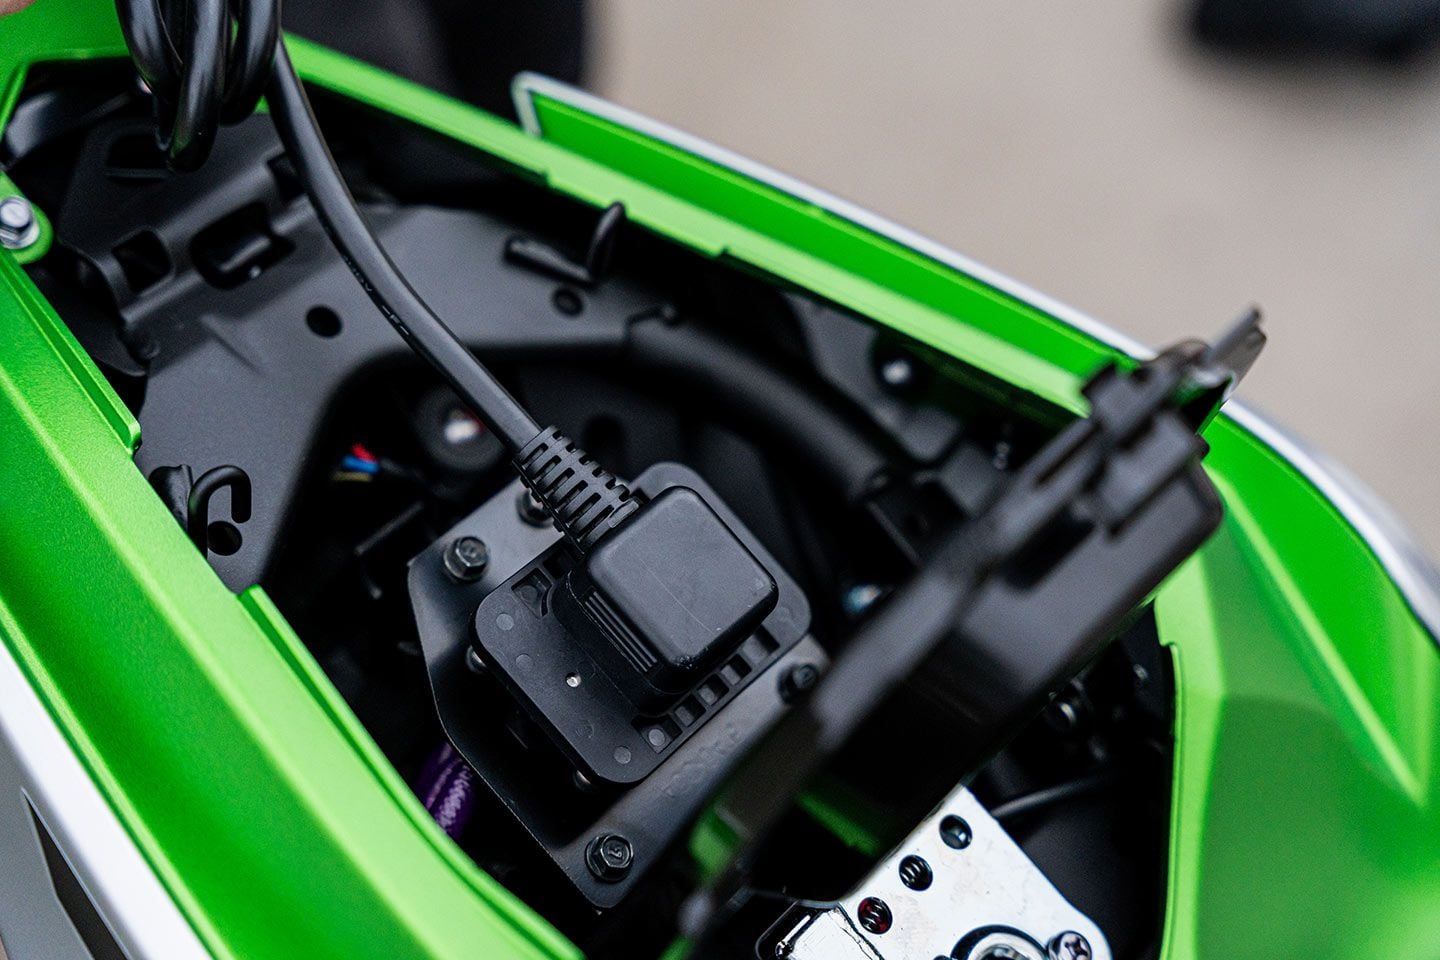 Batteries can be charged one at a time off the bike, or left in the bike and charged simultaneously, by plugging the charger into this charge port in the bike’s tailsection.